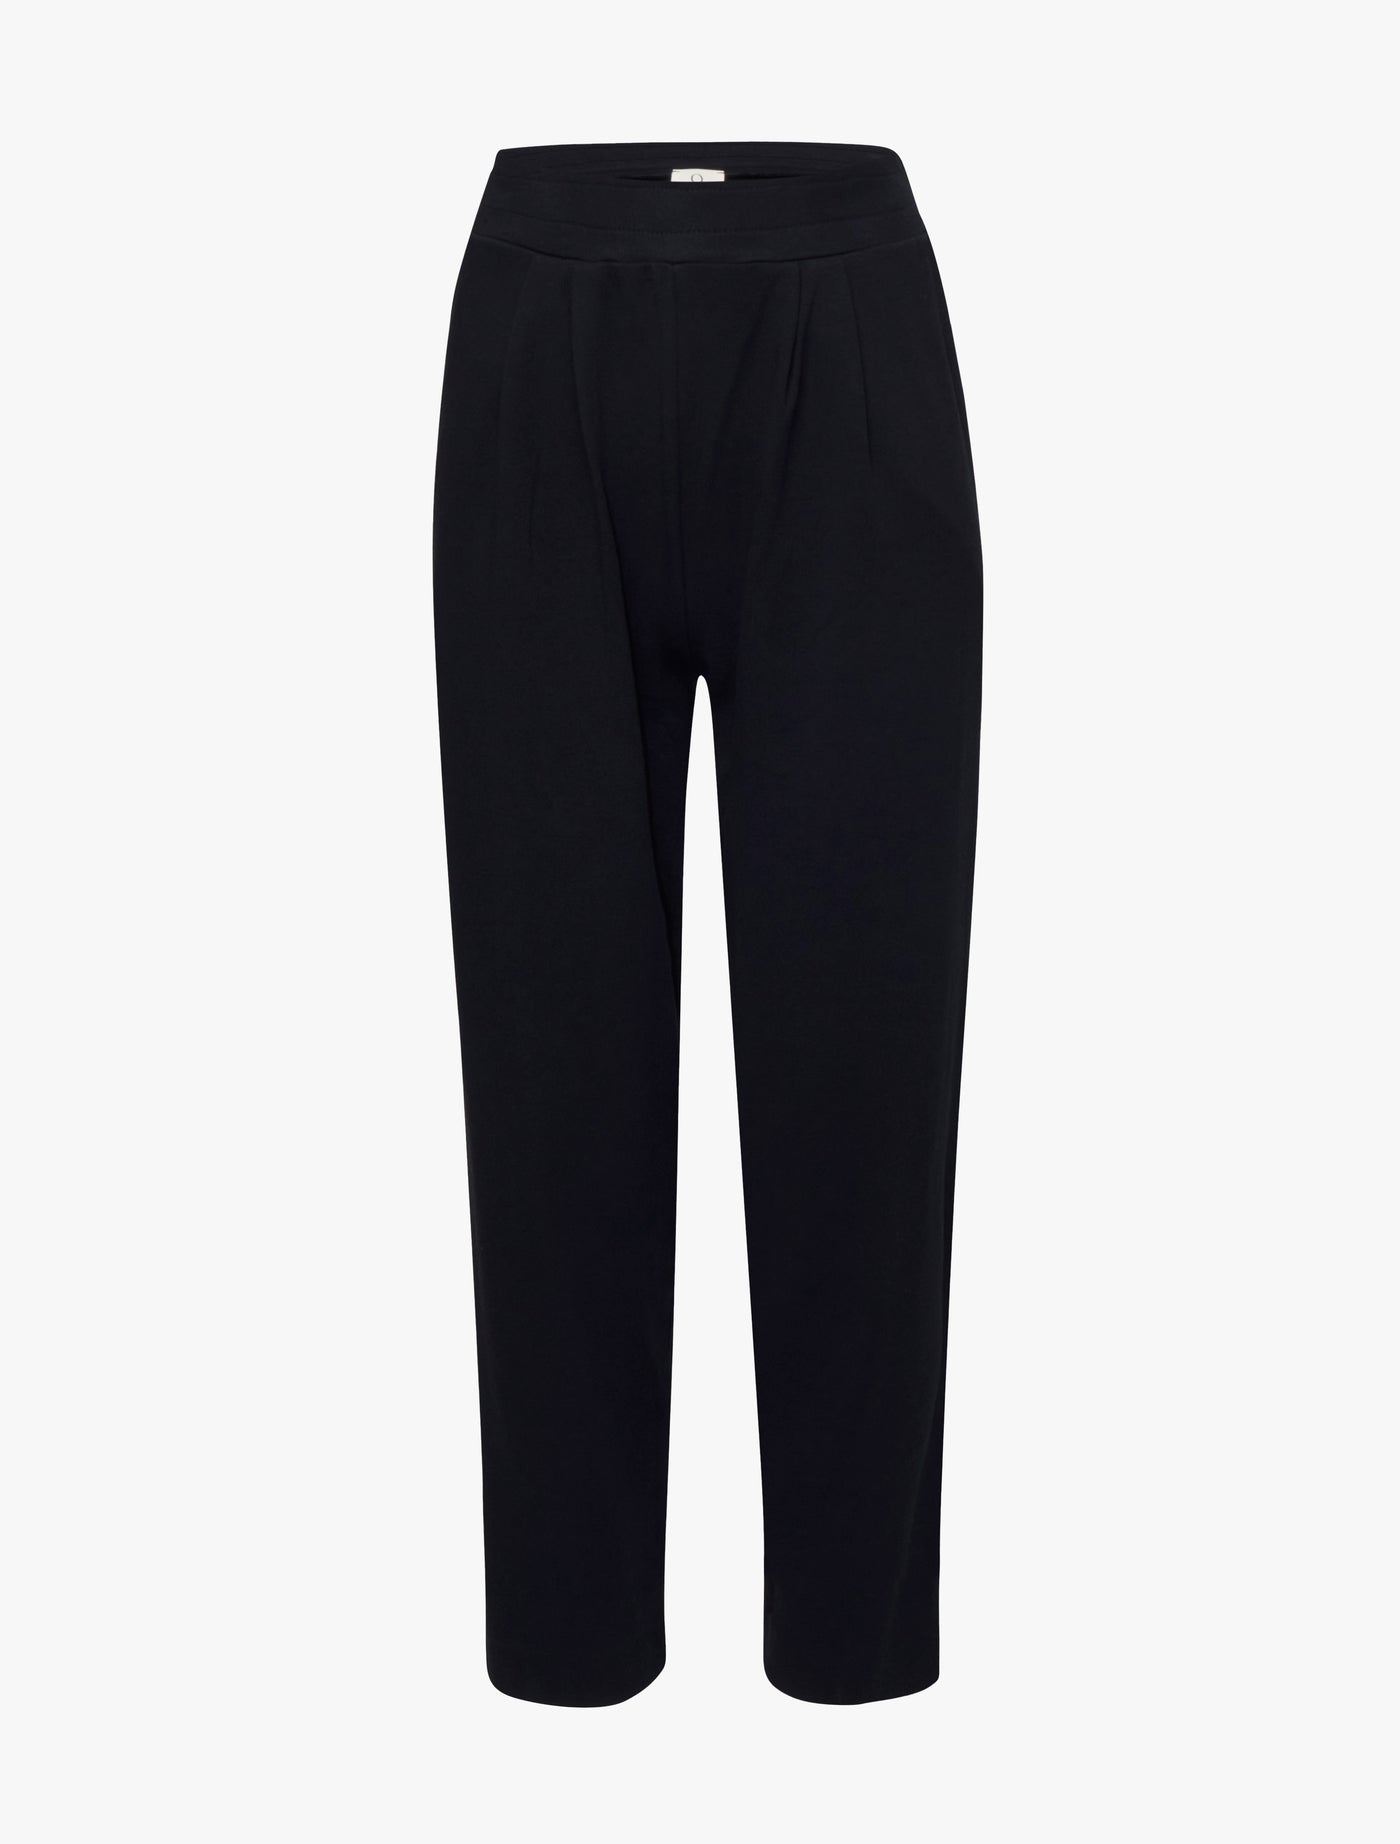 Flax Trousers in Black